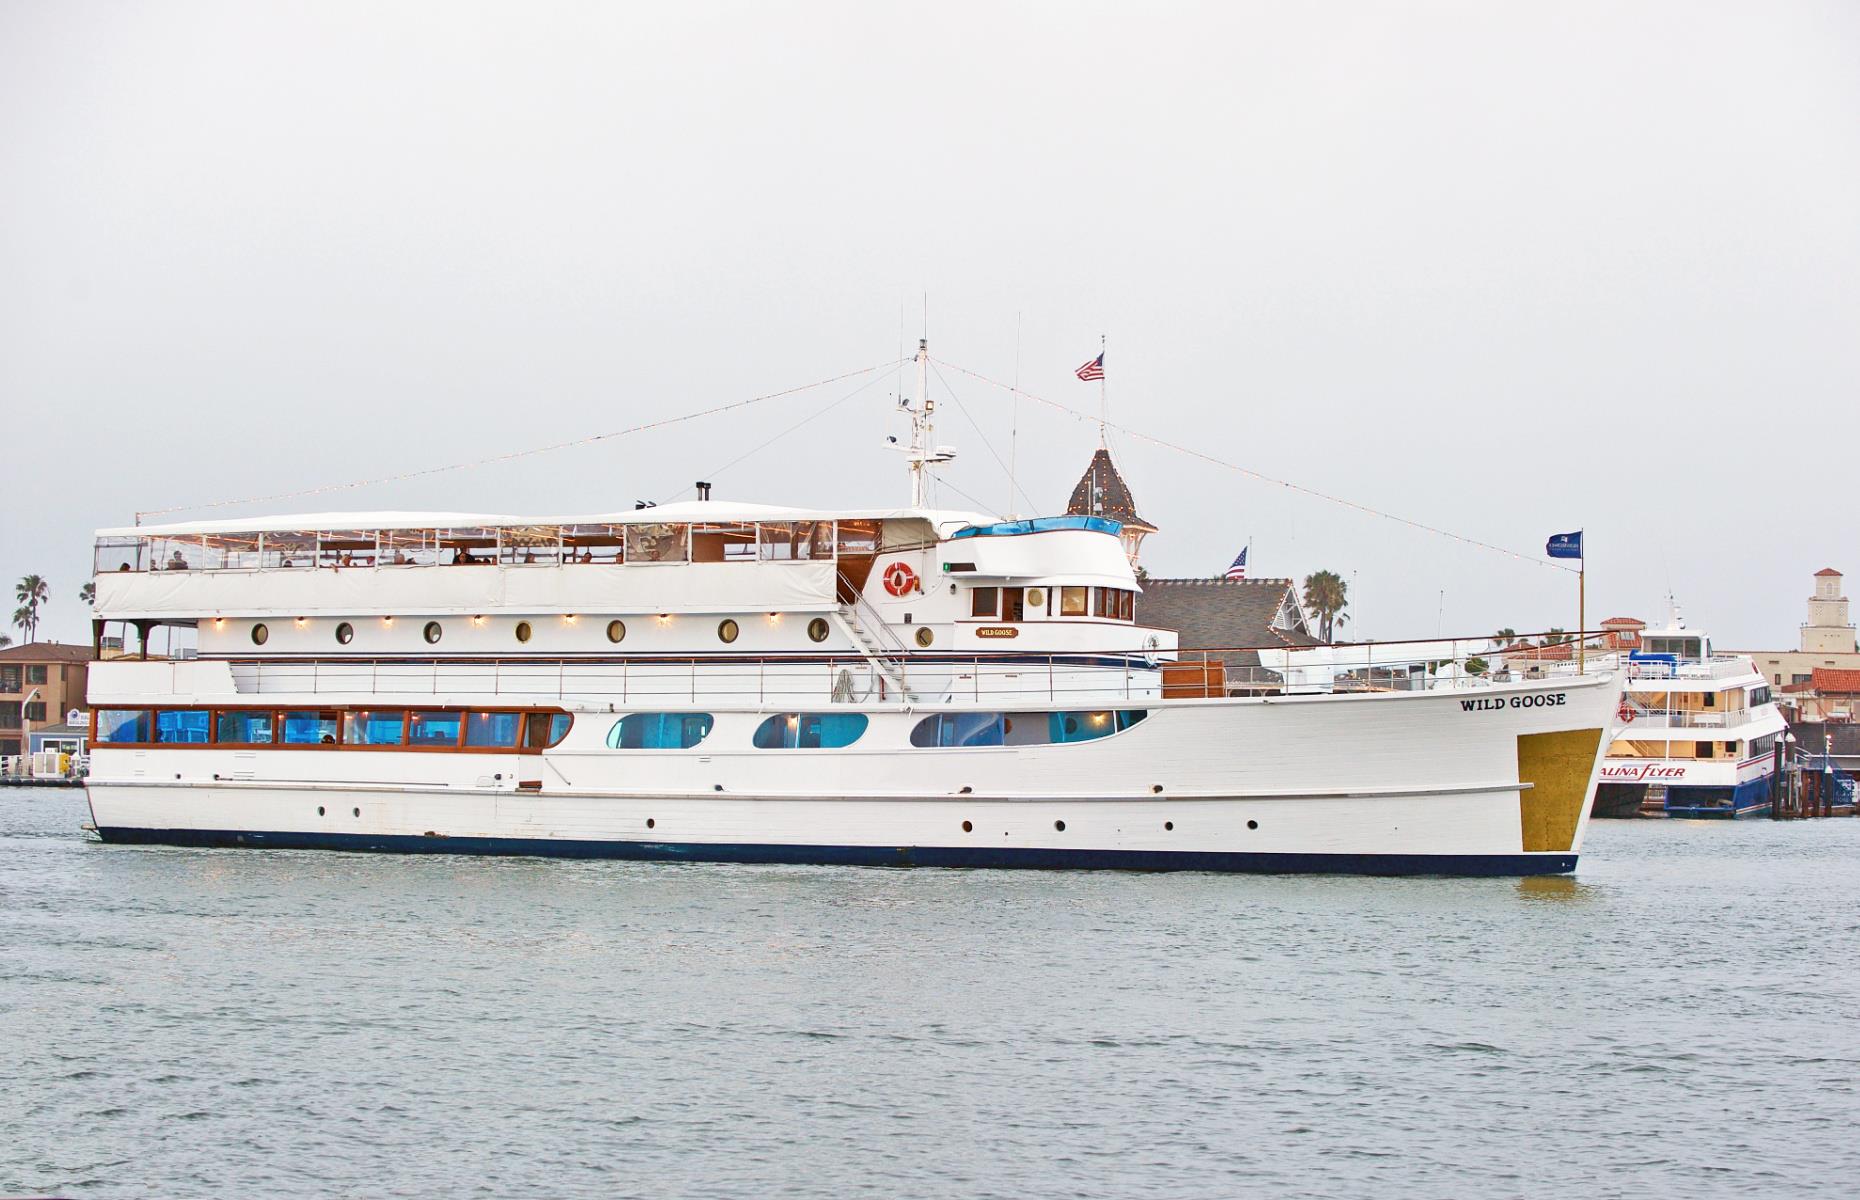 <p>Yachts are a common sight in affluent Newport Beach, but this vintage former US Navy vessel is special. After the ship was retired from military service it became a private yacht, eventually owned by movie star <a href="https://www.johnwayne.com/blog/2019/2/27/dukes-wild-goose-days">John Wayne</a>, who spent considerable time on board. The boat was also a bit of a movie star itself, appearing in the 1968 movie <em>Skidoo</em>. Today it’s <a href="https://www.cityexperiences.com/newport-beach/city-cruises/our-fleet/wild-goose/">available</a> for private dinner cruises and cocktail parties.</p>  <p><a href="https://www.loveexploring.com/galleries/81720/from-mayflower-to-titanic-the-worlds-most-historic-ships-you-can-visit?page=1"><strong>Discover more places to see the world's most famous ships</strong></a></p>